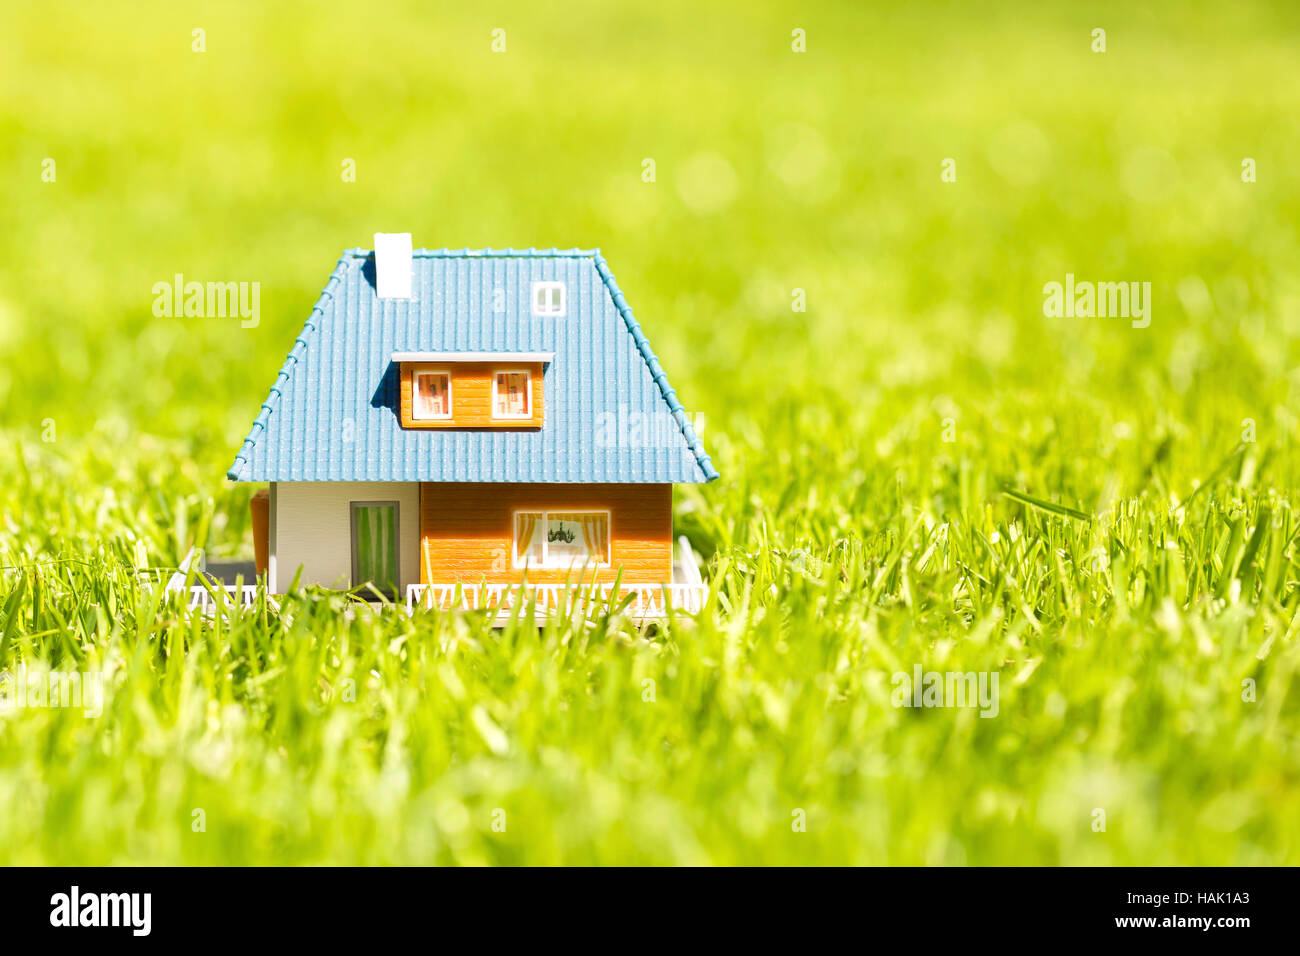 house scale model on green grass with copy space Stock Photo